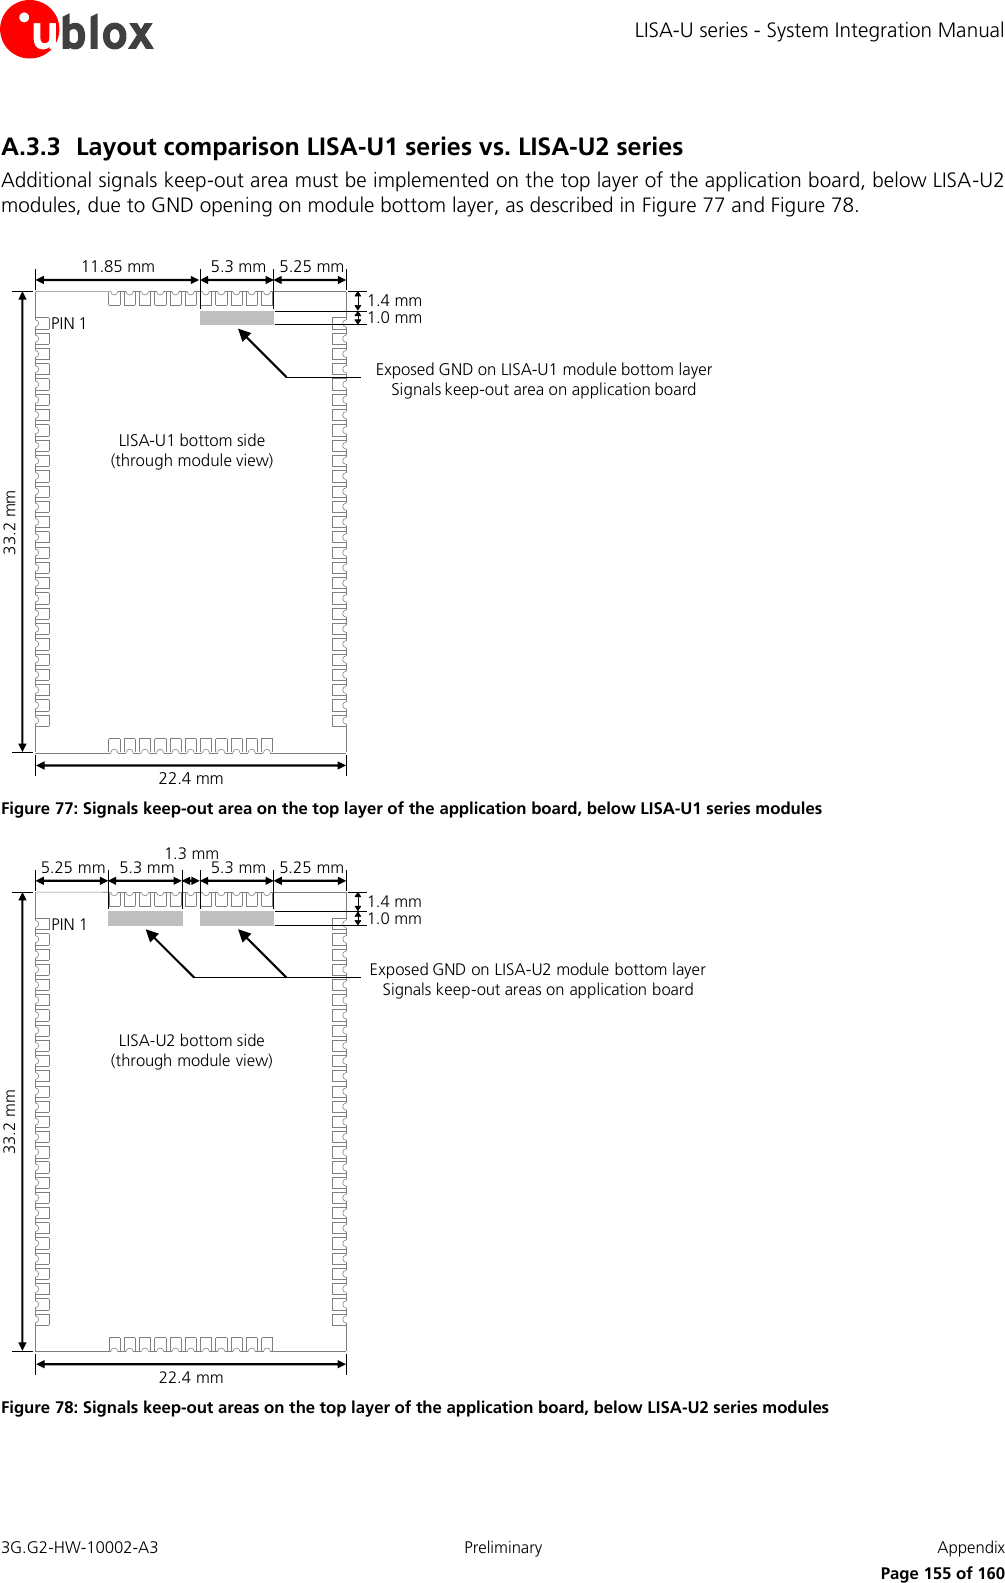 LISA-U series - System Integration Manual 3G.G2-HW-10002-A3  Preliminary  Appendix      Page 155 of 160 A.3.3 Layout comparison LISA-U1 series vs. LISA-U2 series Additional signals keep-out area must be implemented on the top layer of the application board, below LISA-U2 modules, due to GND opening on module bottom layer, as described in Figure 77 and Figure 78.  33.2 mm11.85 mm22.4 mm5.3 mm 5.25 mm1.4 mm1.0 mmPIN 1LISA-U1 bottom side (through module view)Exposed GND on LISA-U1 module bottom layerSignals keep-out area on application board Figure 77: Signals keep-out area on the top layer of the application board, below LISA-U1 series modules 33.2 mm5.25 mm22.4 mm5.3 mm 5.25 mm5.3 mm1.3 mm1.4 mm1.0 mmPIN 1LISA-U2 bottom side (through module view)Exposed GND on LISA-U2 module bottom layerSignals keep-out areas on application board Figure 78: Signals keep-out areas on the top layer of the application board, below LISA-U2 series modules  